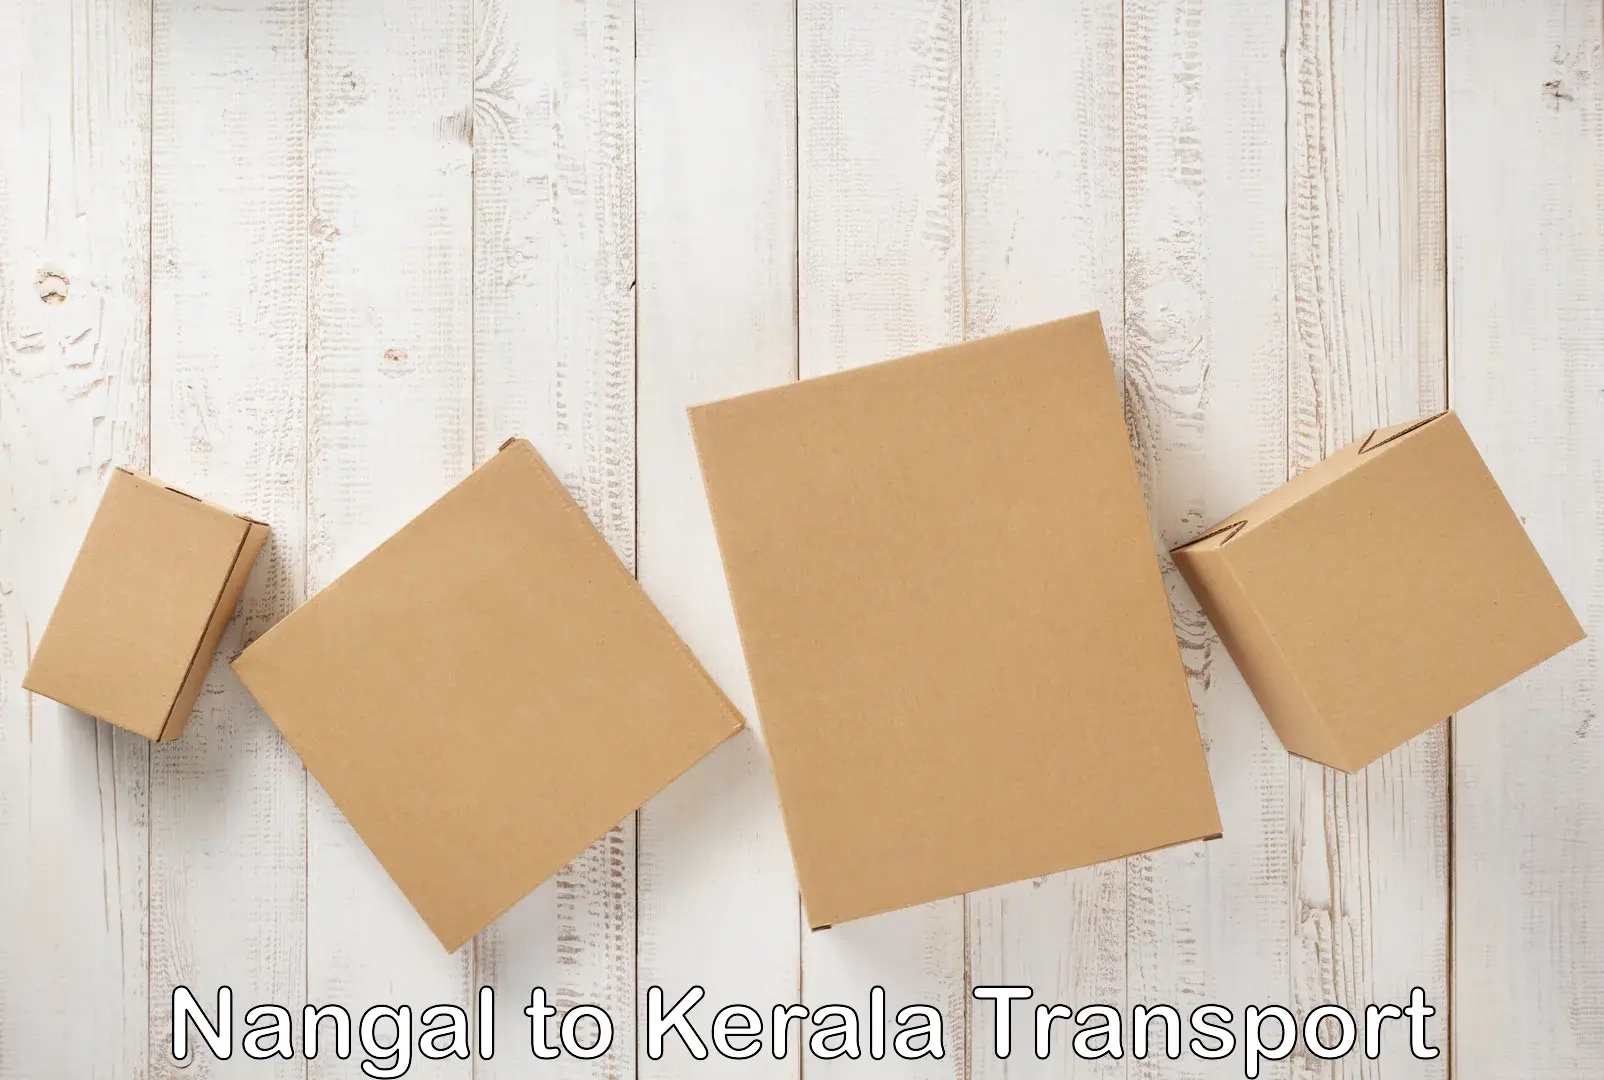 Container transport service Nangal to Kerala